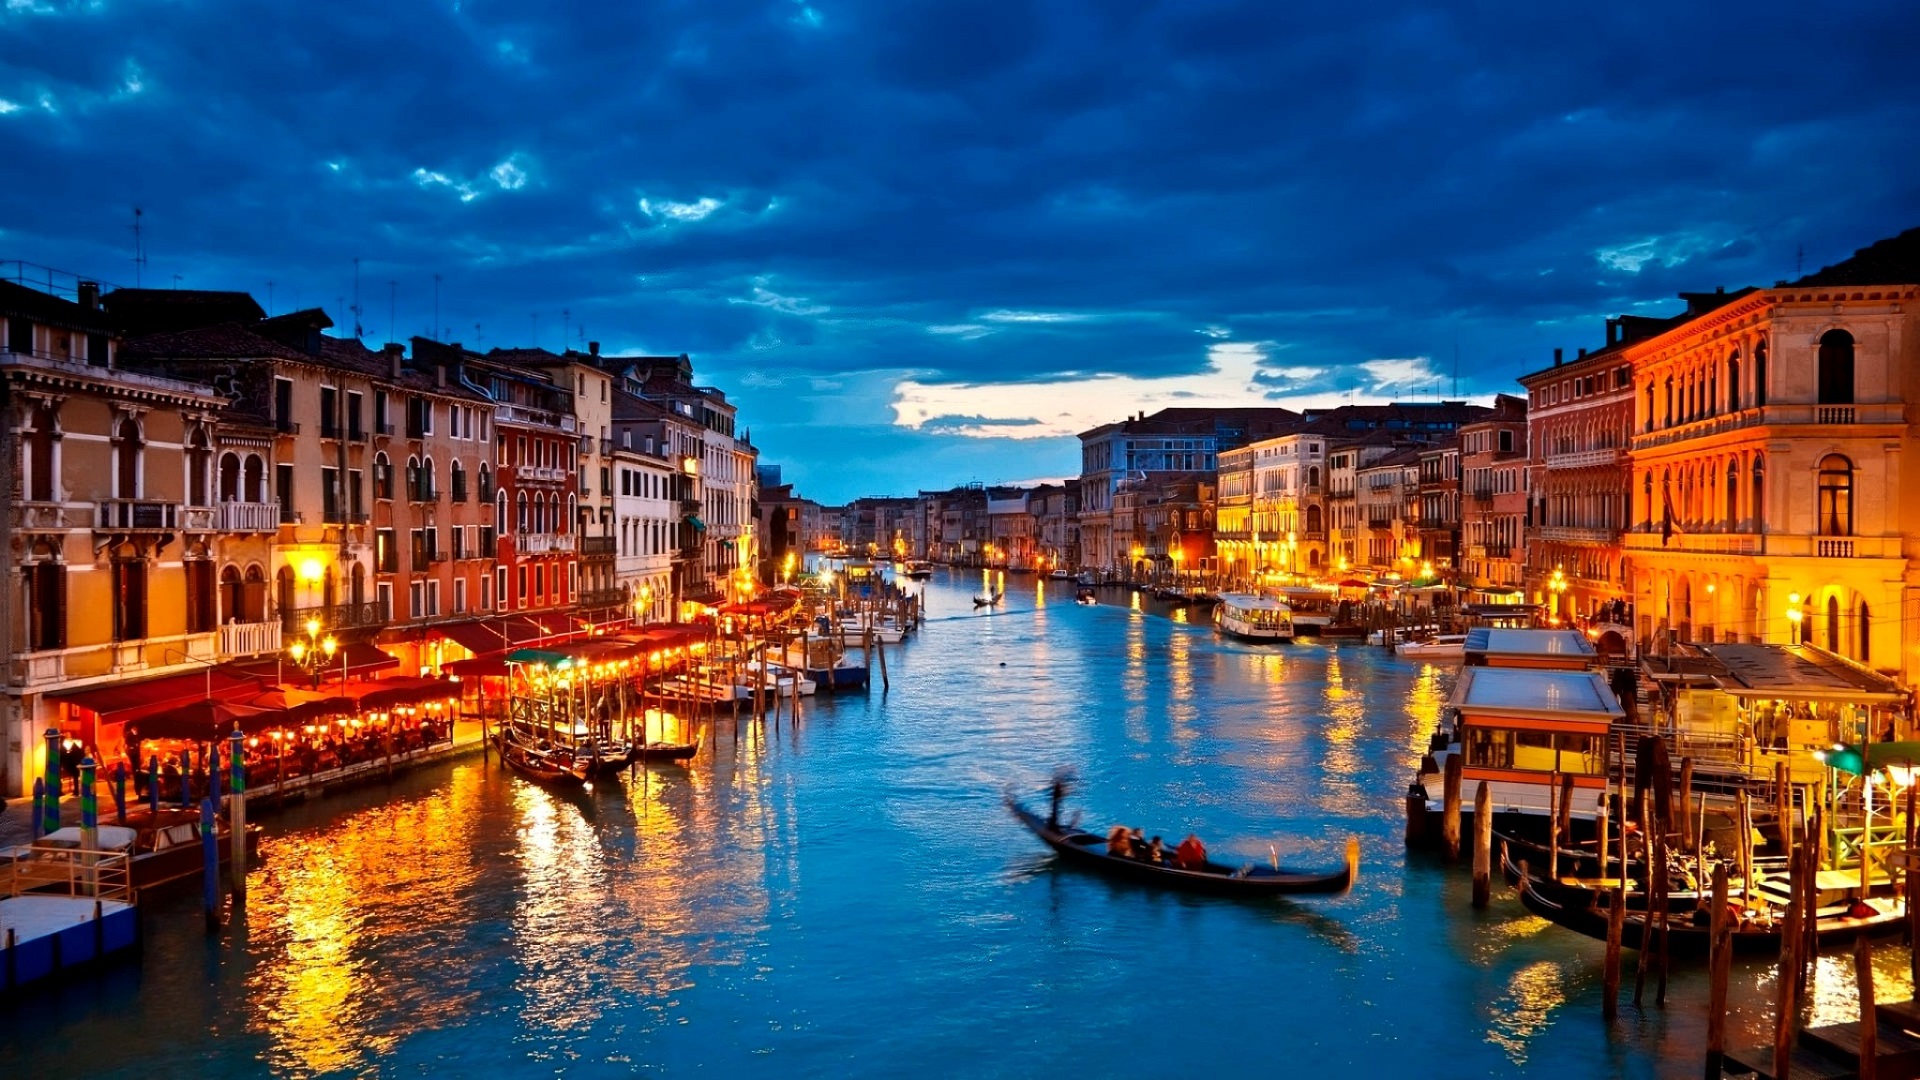 General 1920x1080 Venice Italy city night city lights gondolas water river building Grand Canal clouds